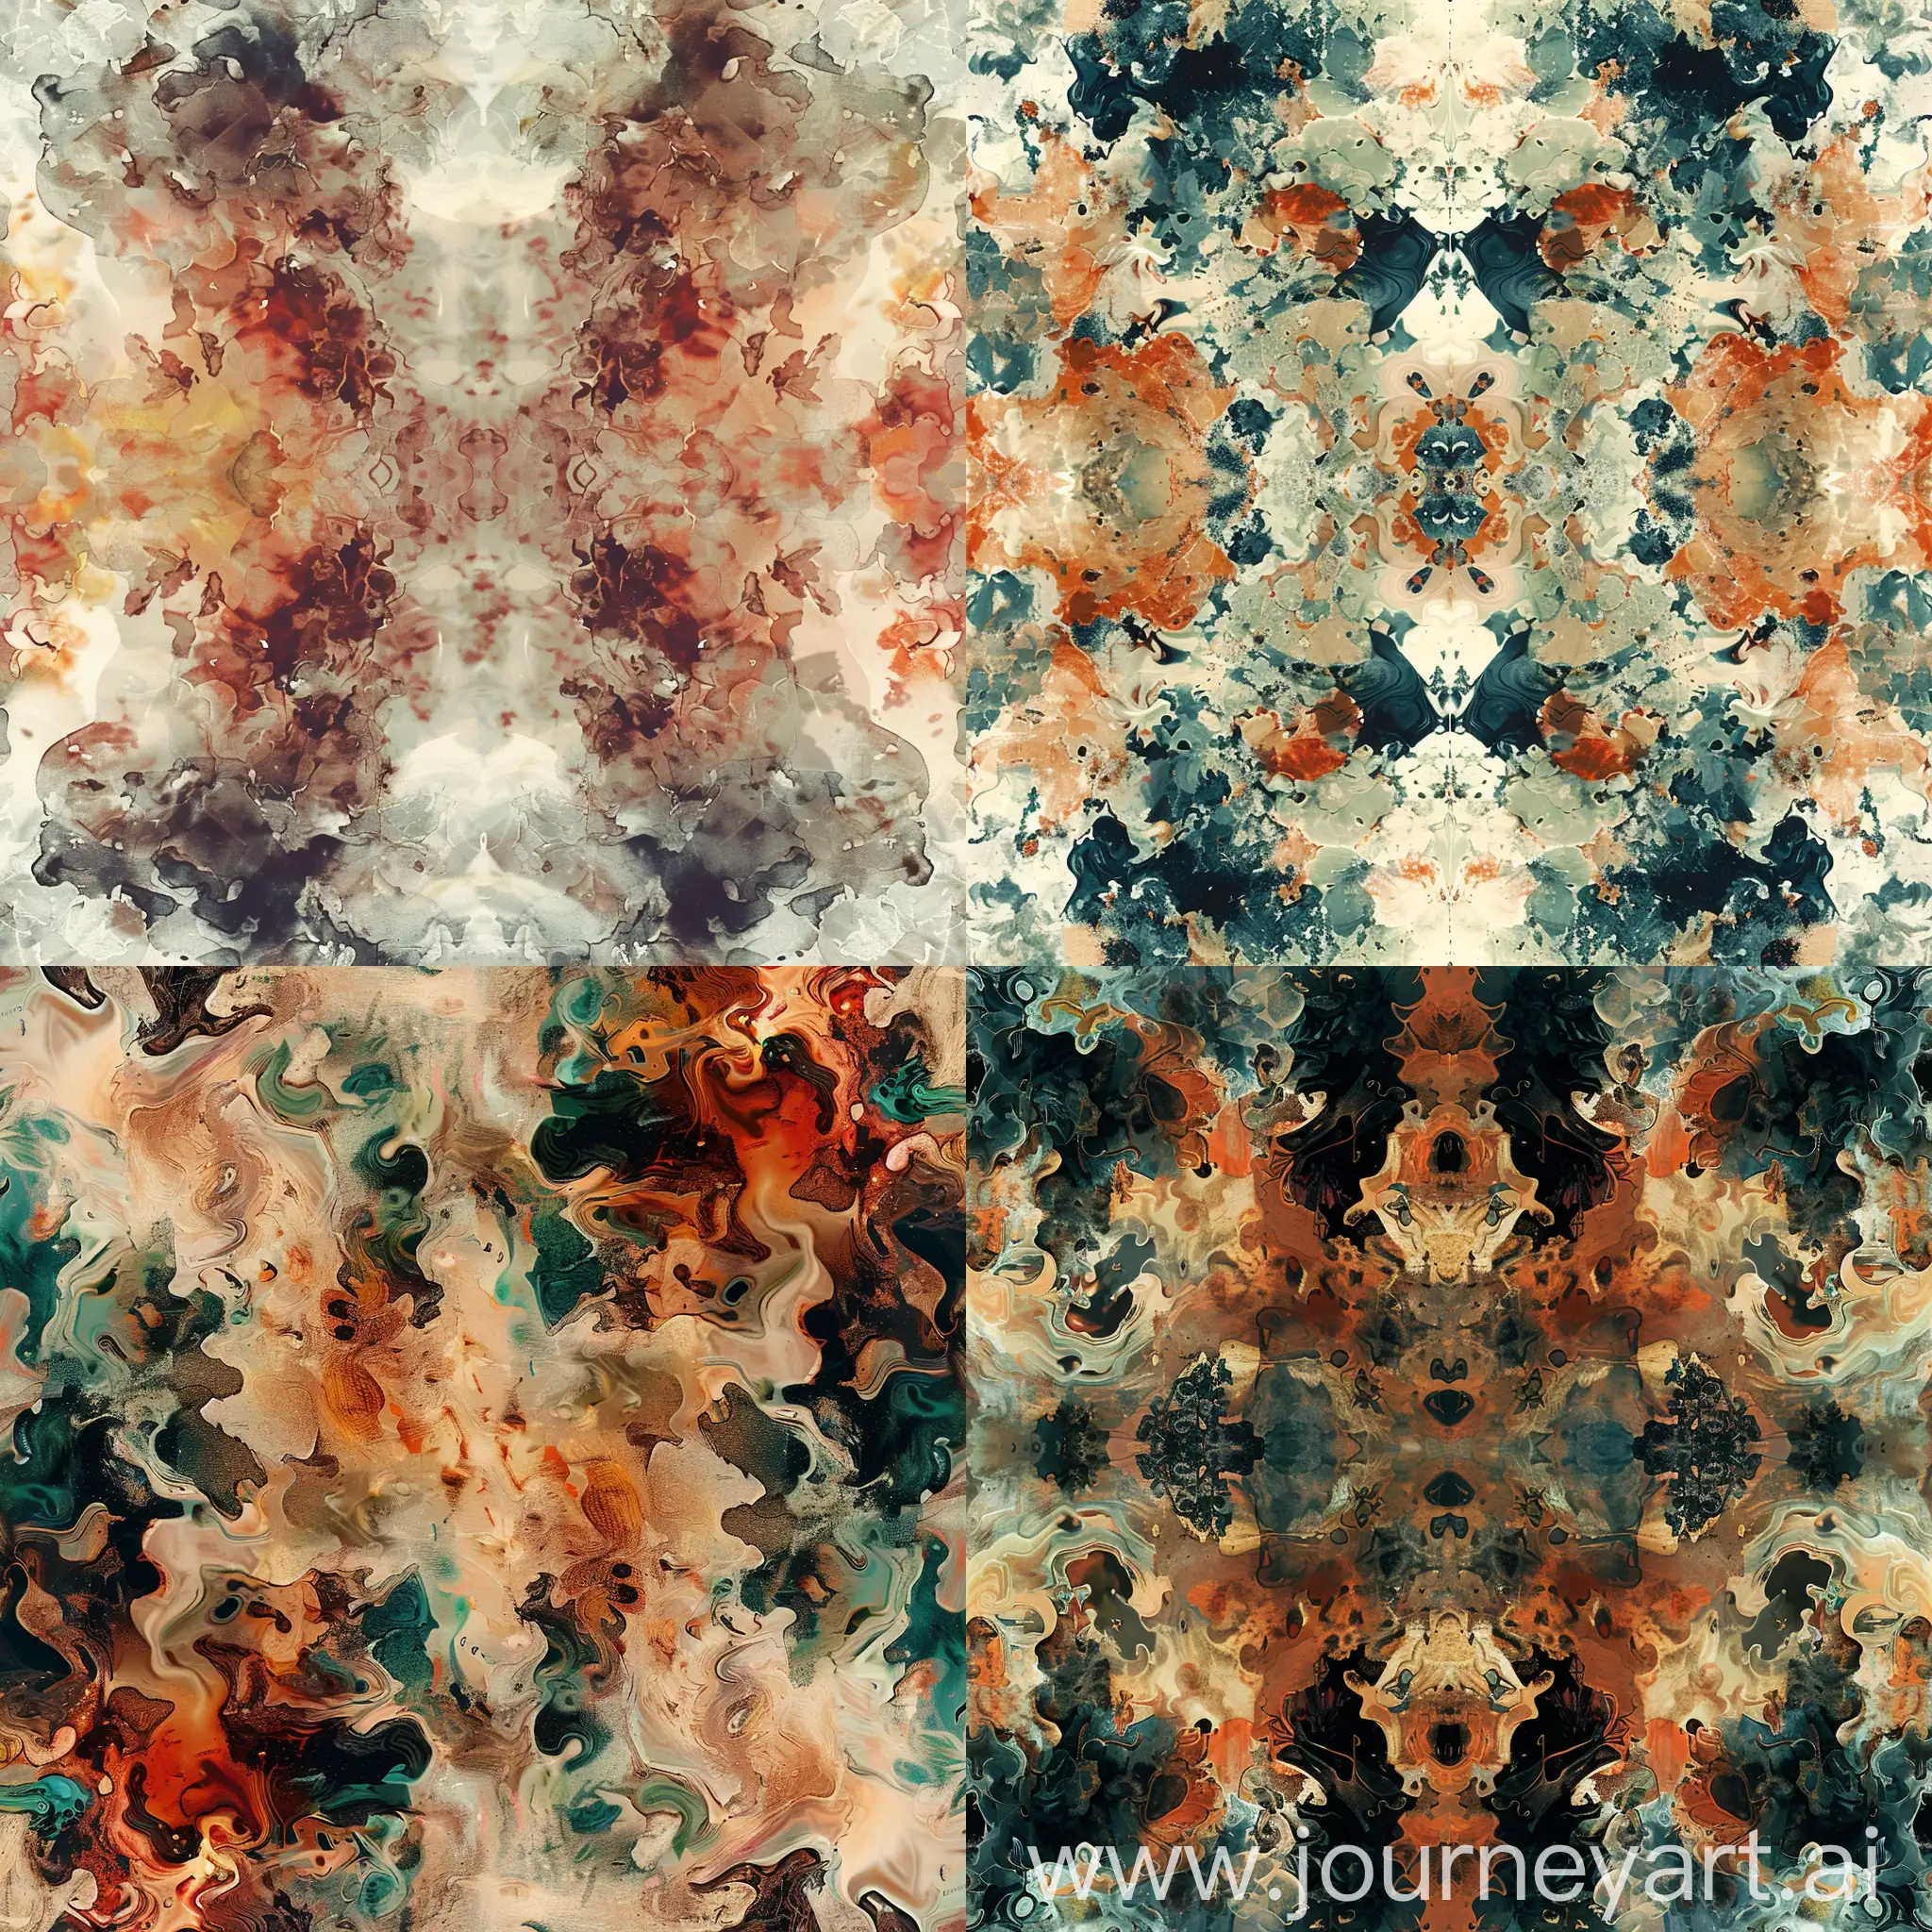 Organic-Fluid-Art-Ambient-Music-Inspired-Abstract-Pattern